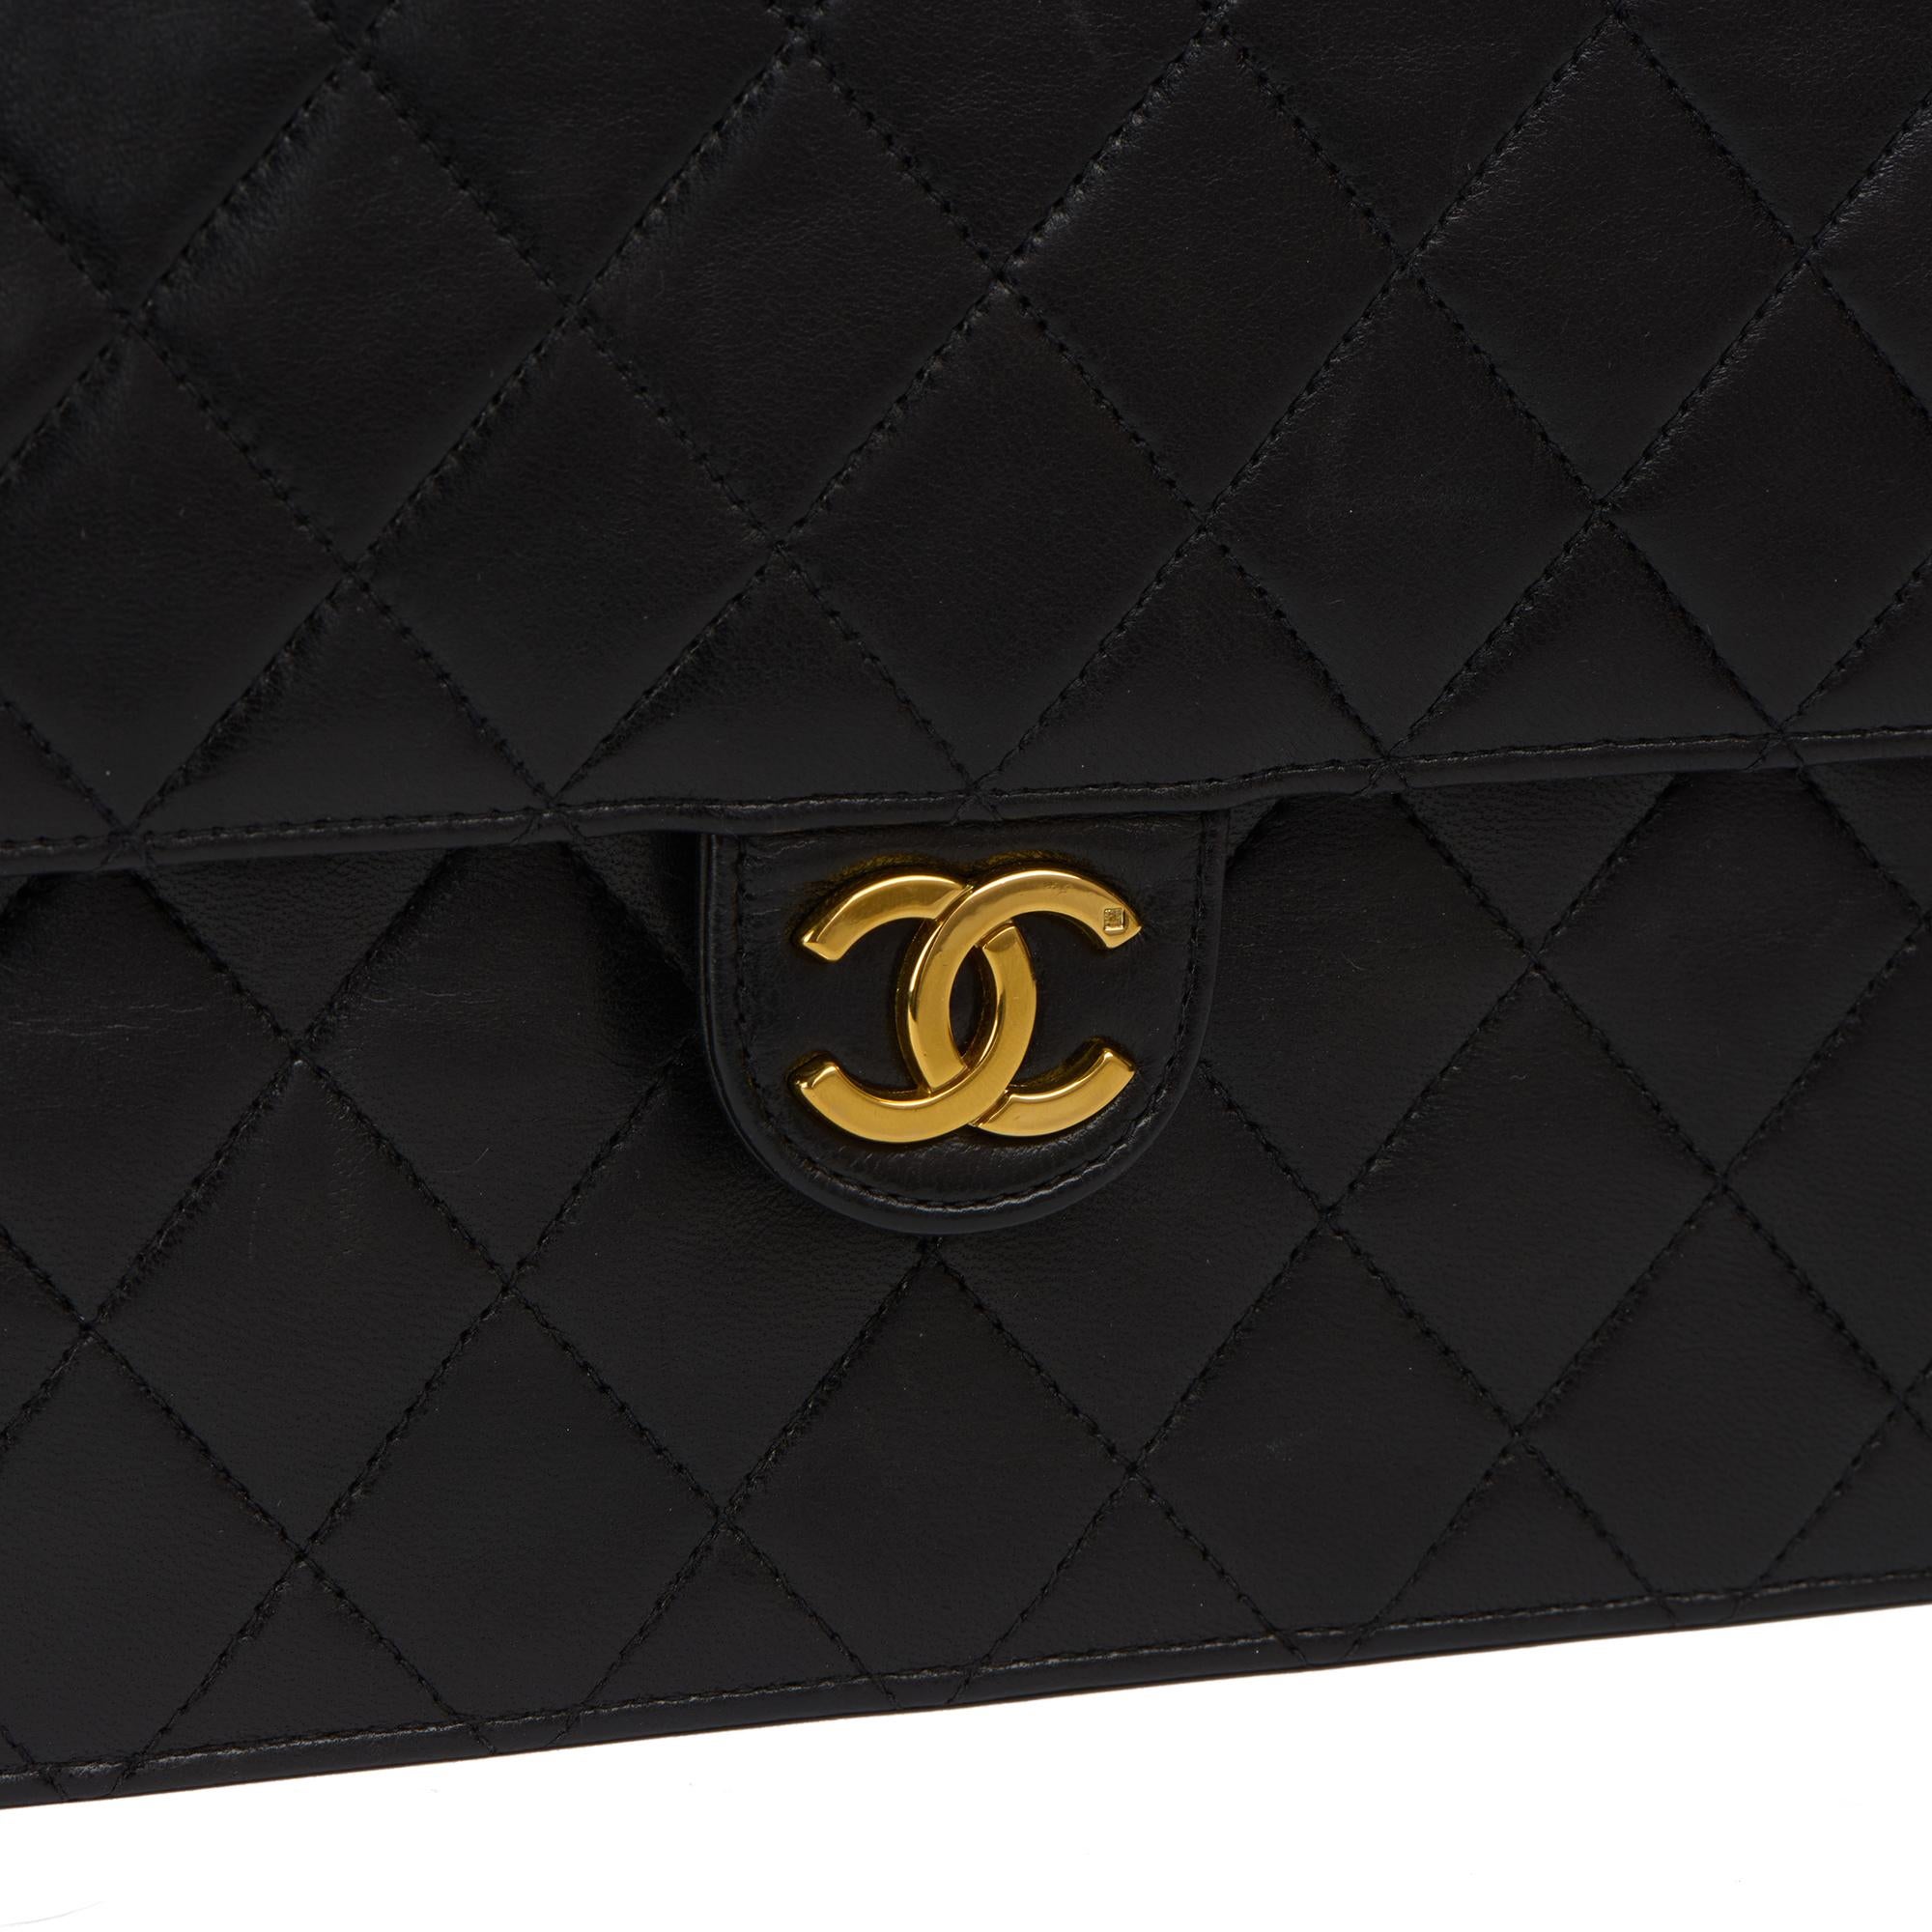 1995 Chanel Black Quilted Lambskin Vintage Small Classic Single Flap Bag 3